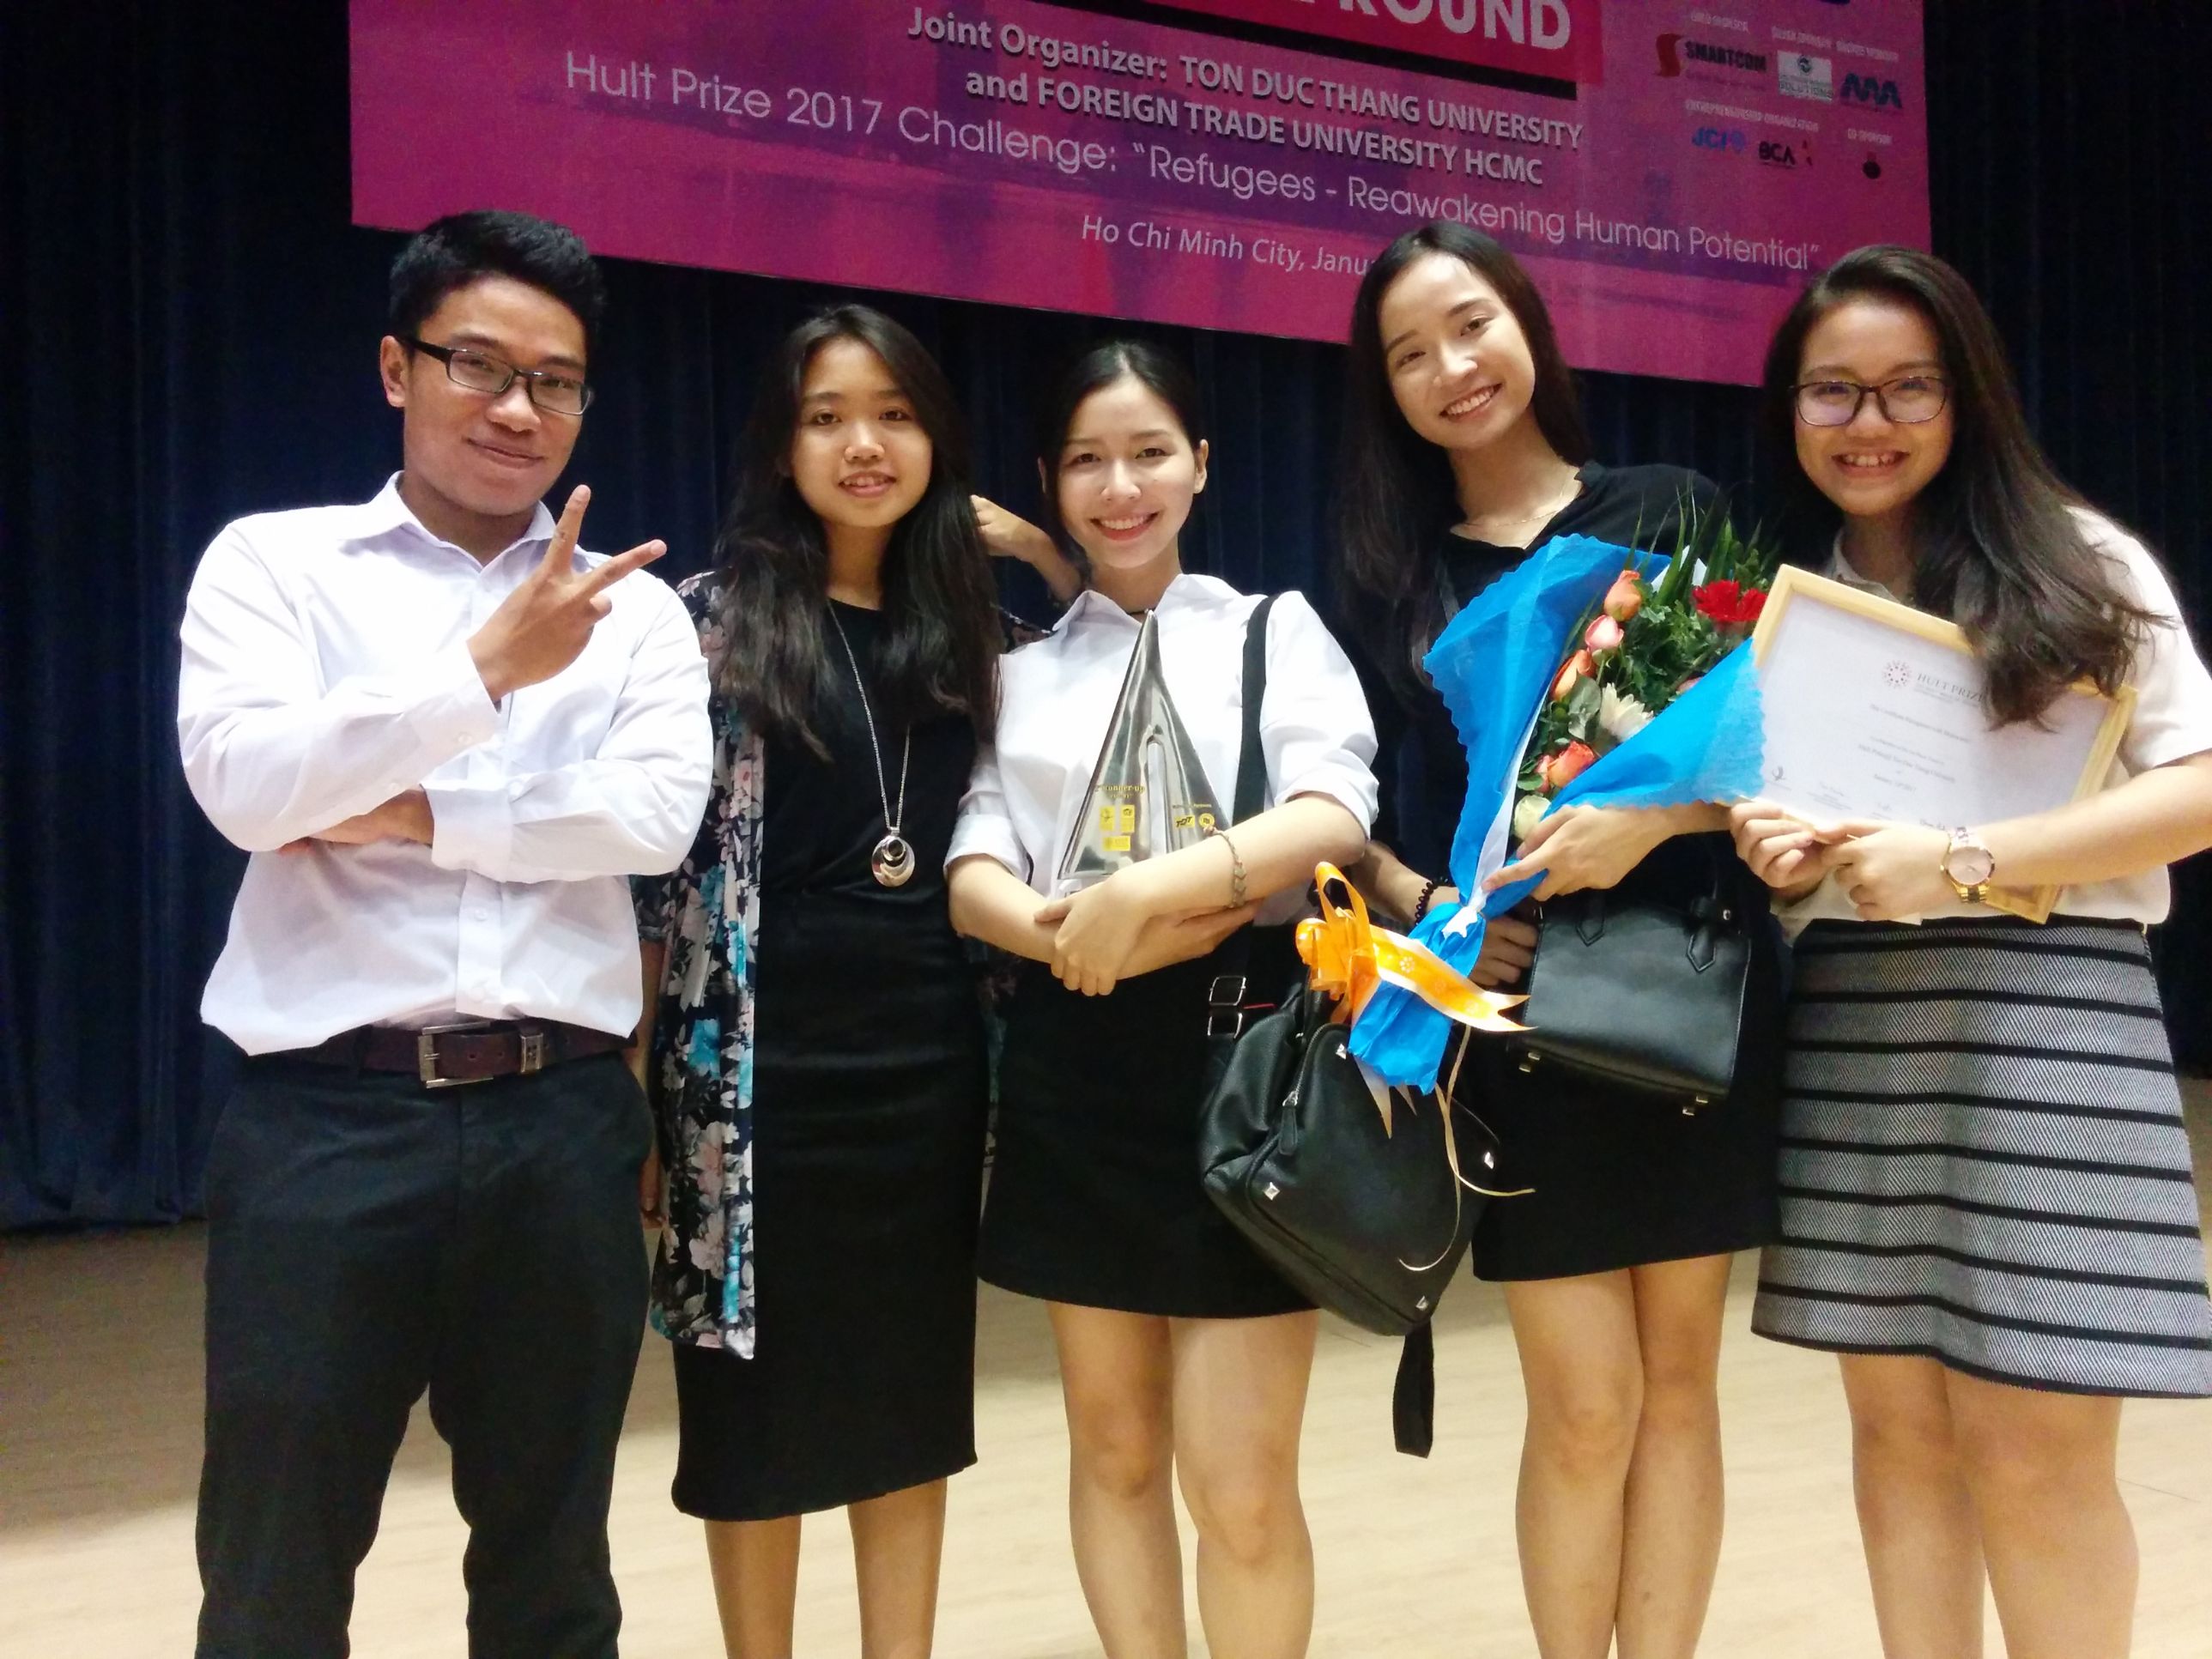 (From right) RMIT Vietnam students La Thuy Tien, Truong Quynh Anh, Dang Nguyen Nhu Quynh, and Dang Kim Thien Huong at the Vietnam National Finals for the Hult Prize 2017.